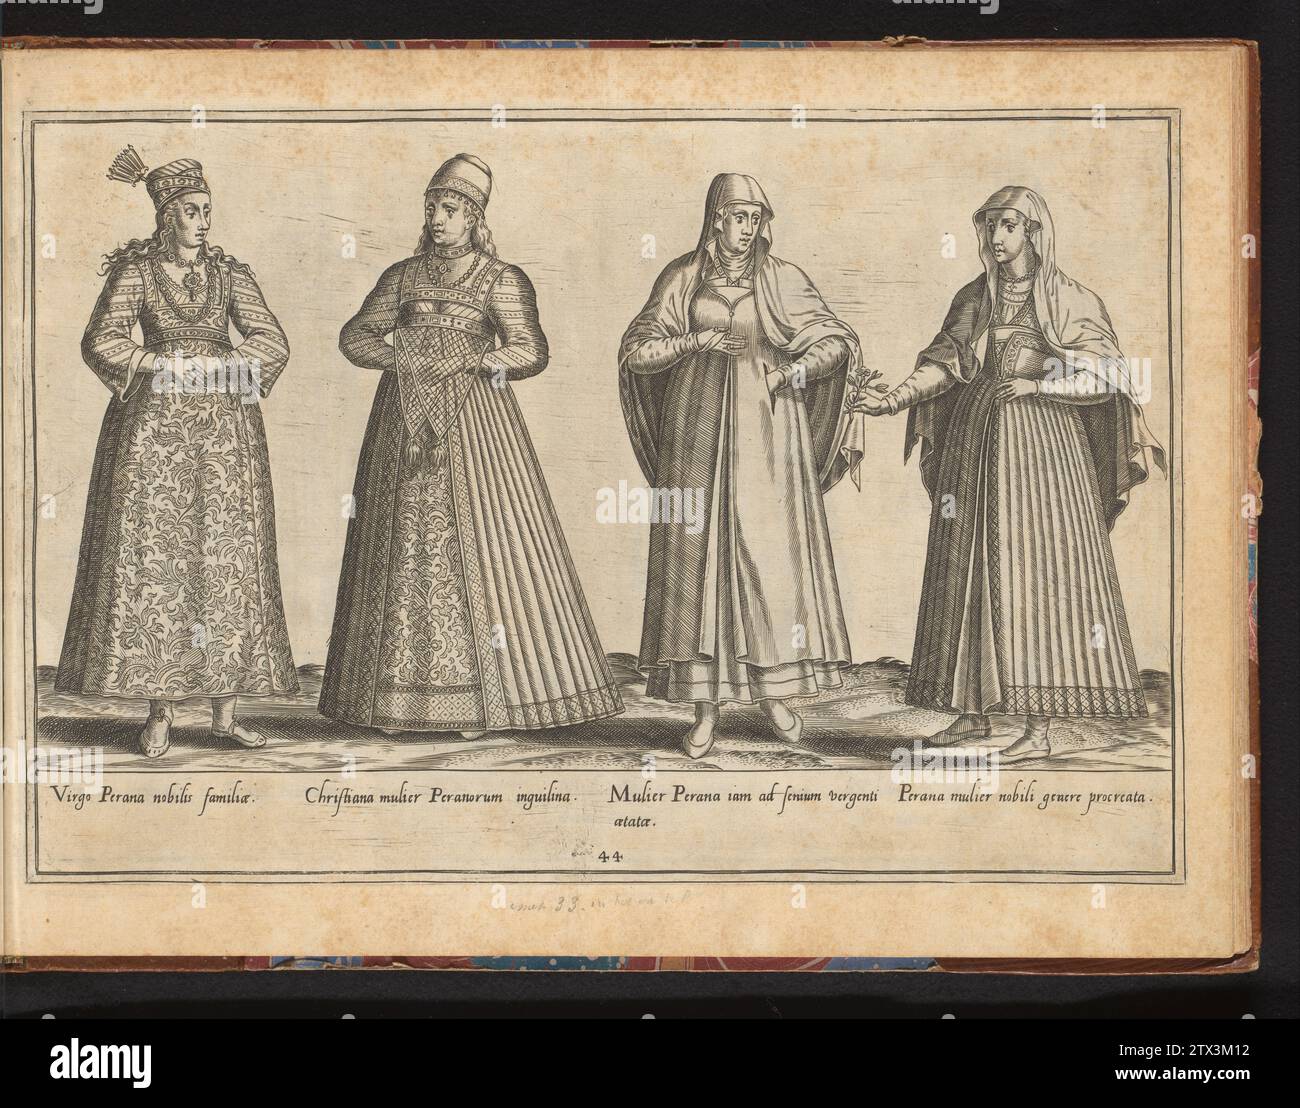 Four Persian women, dressed according to the fashion of approx. 1580, in or before 1581 Prent shipped Het Boek 'all the near Europe, Asia, Aphric and America nations attitude ...', 1581. The Prent Maakt deel shipped van een album.  paper engraving Prent shipped Het Boek 'all the near Europe, Asia, Aphric and America nations attitude ...', 1581. The Prent Maakt deel shipped van een album.  paper engraving Stock Photo